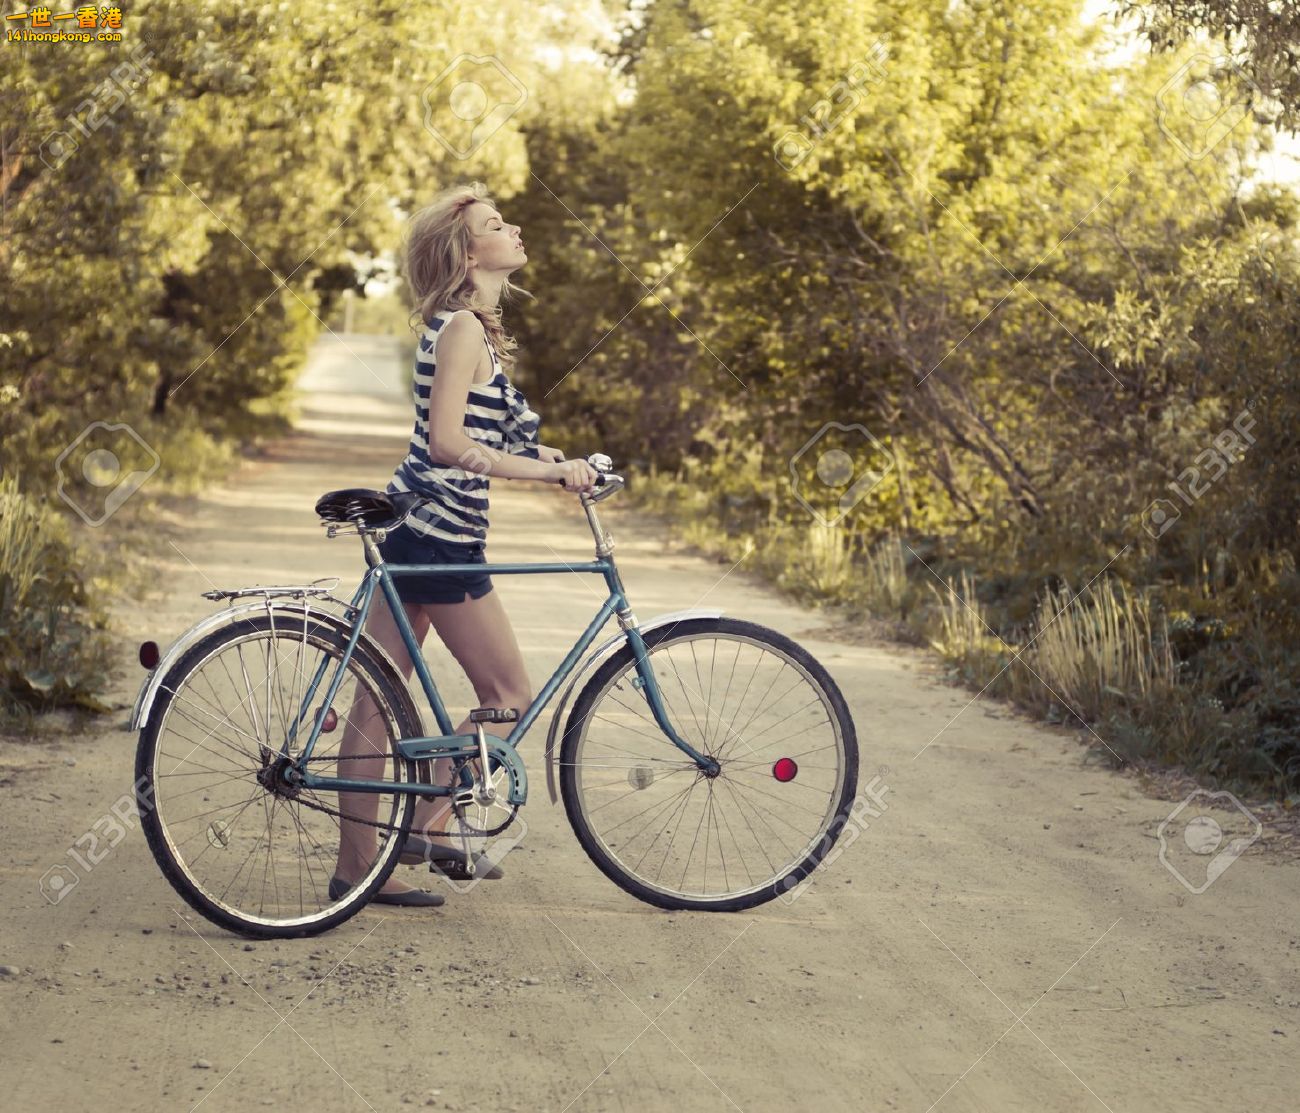 15760214-beautiful-smiling-girl-with-a-bicycle-on-the-road-Stock-Photo-fashion-b.jpg